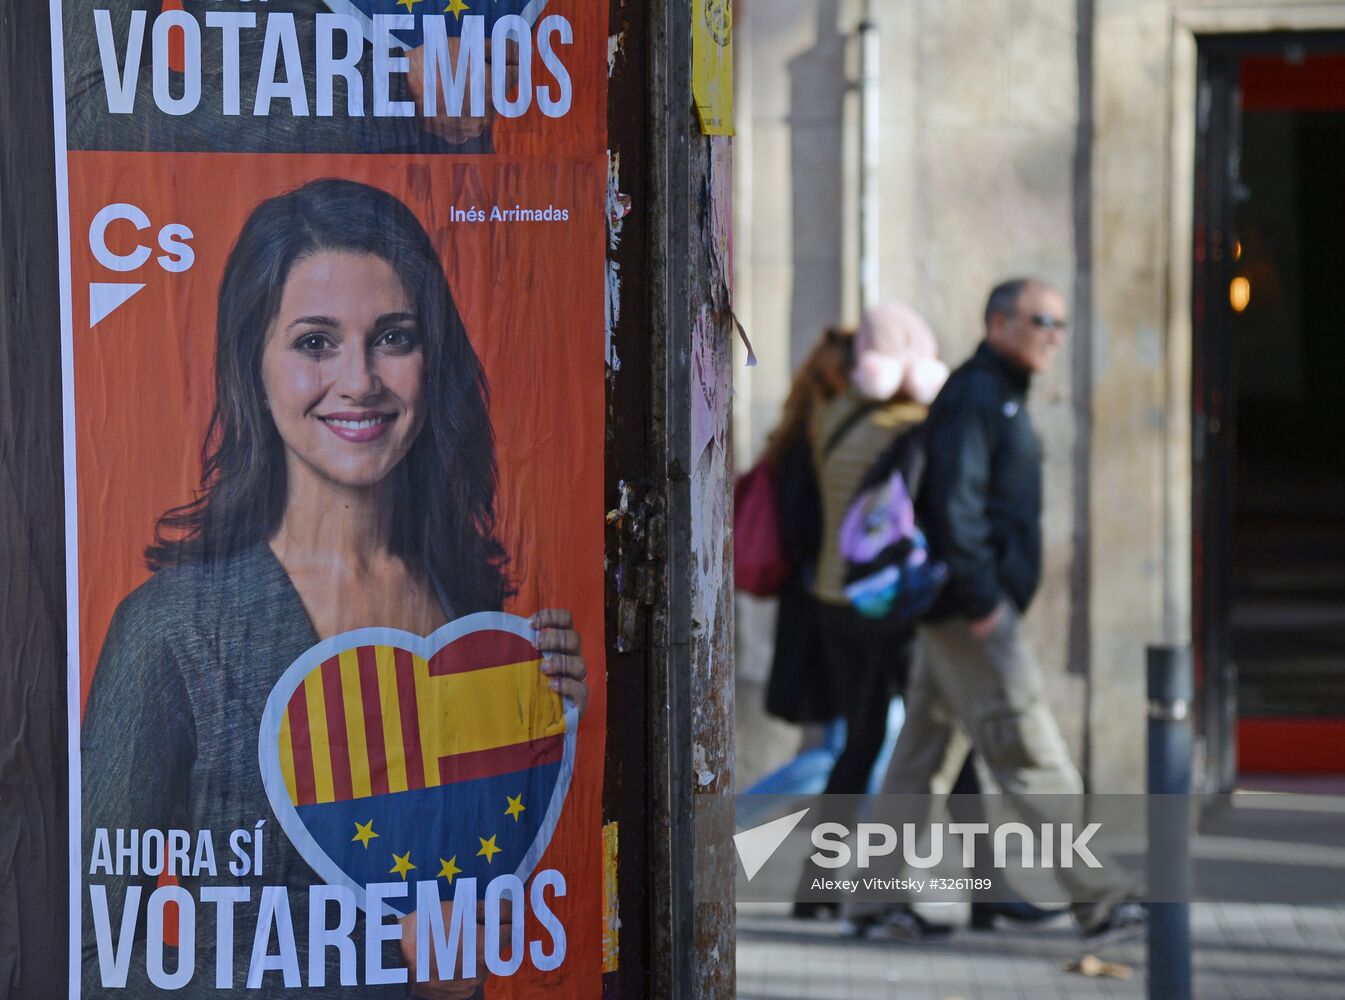 Election campaigning in Catalonia